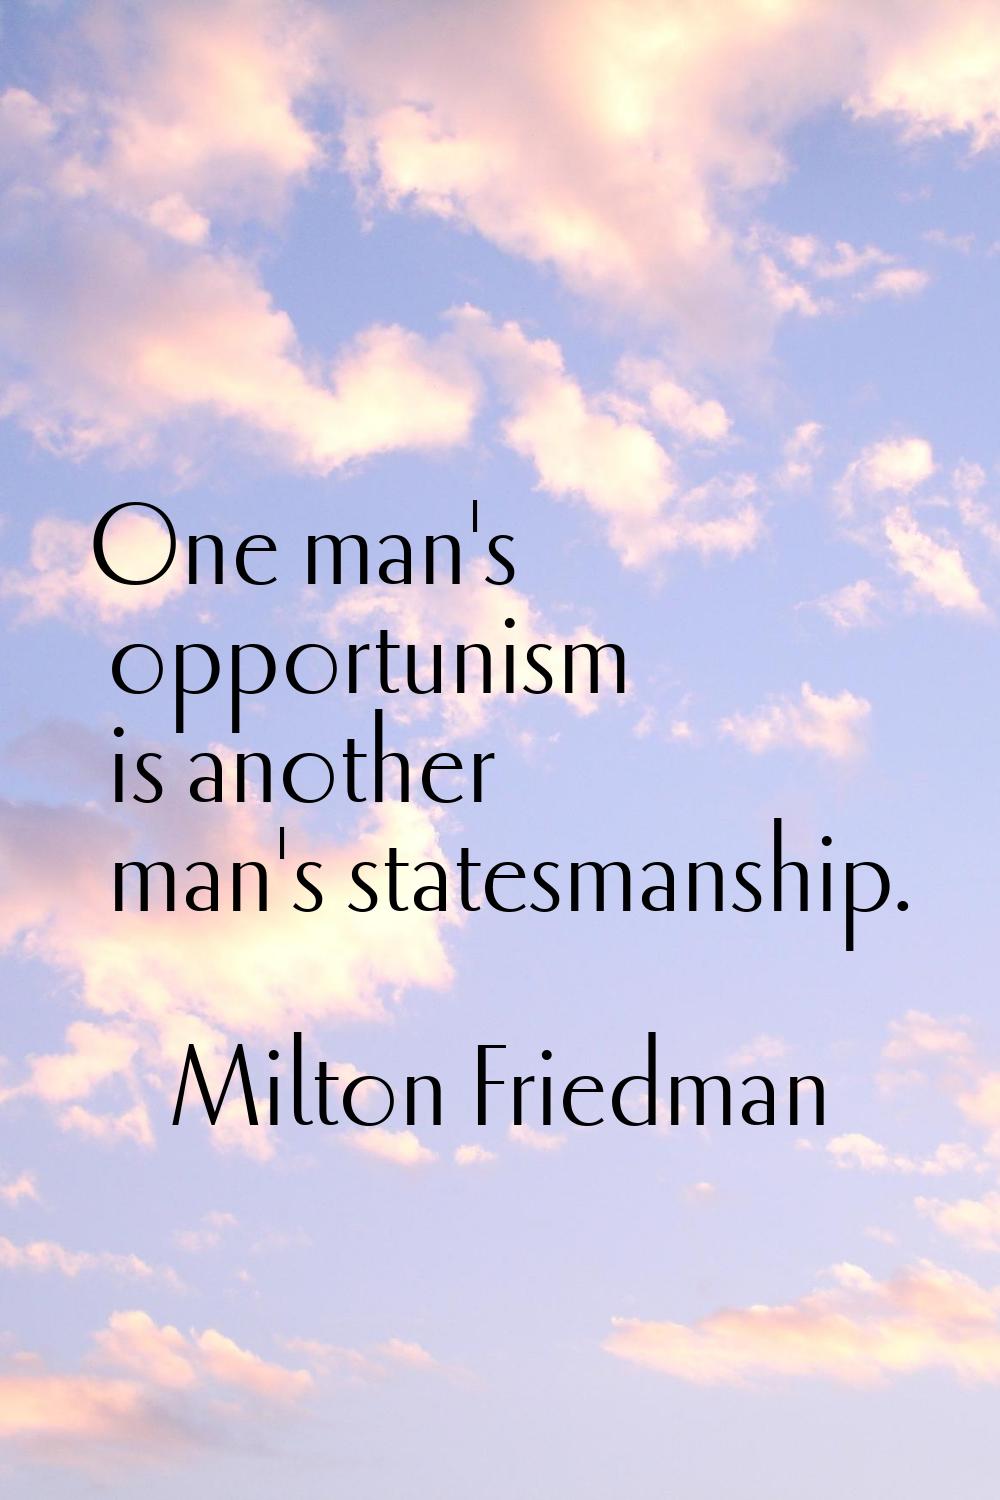 One man's opportunism is another man's statesmanship.